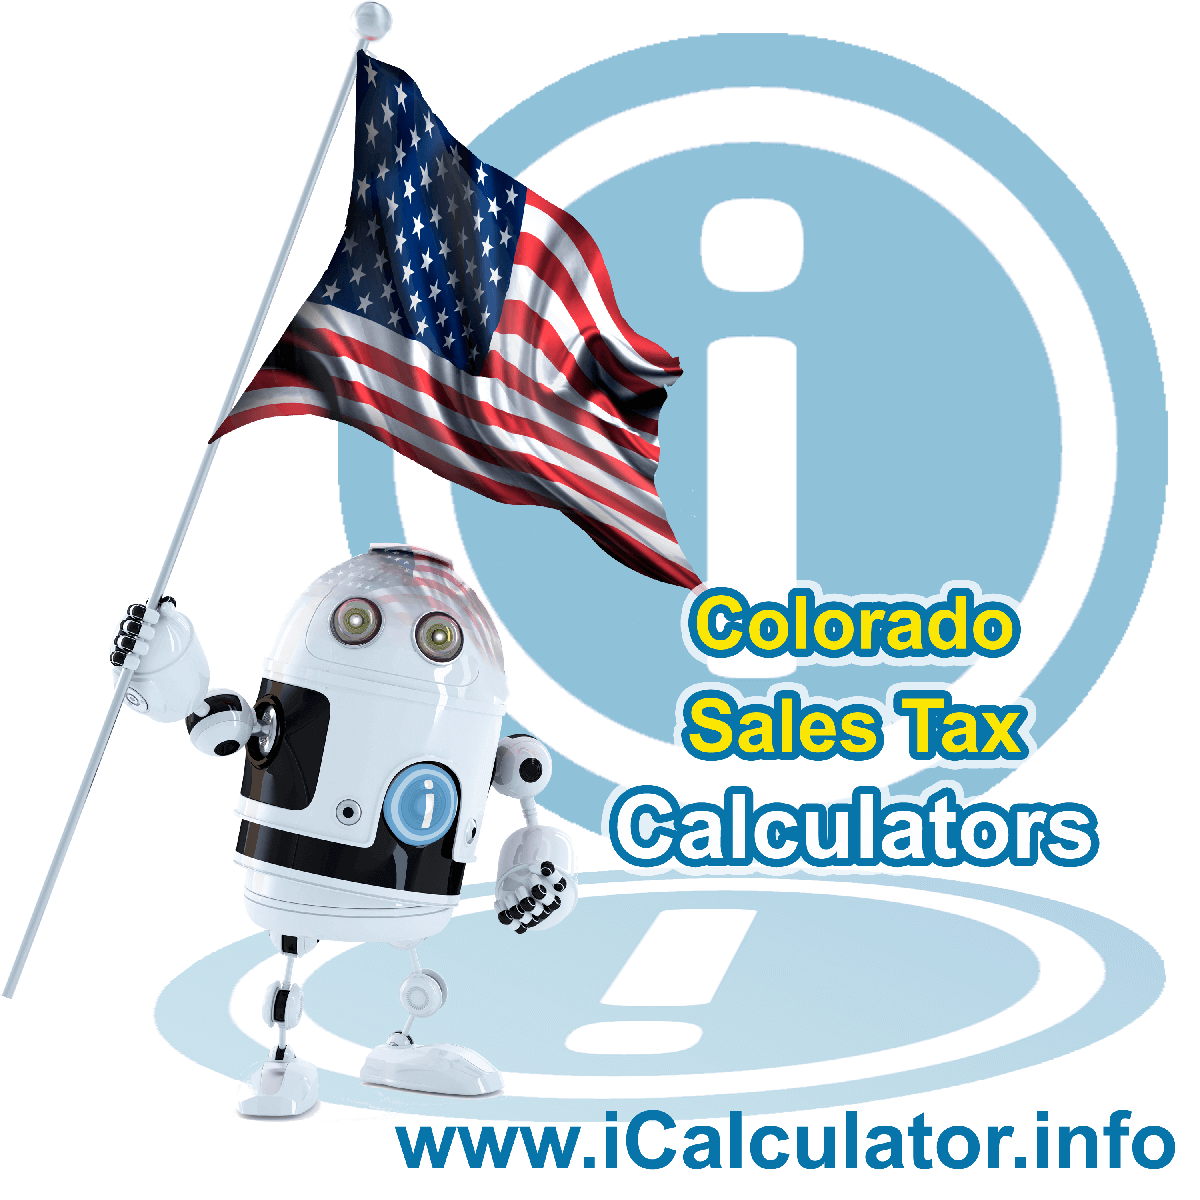 Empire Sales Rates: This image illustrates a calculator robot calculating Empire sales tax manually using the Empire Sales Tax Formula. You can use this information to calculate Empire Sales Tax manually or use the Empire Sales Tax Calculator to calculate sales tax online.